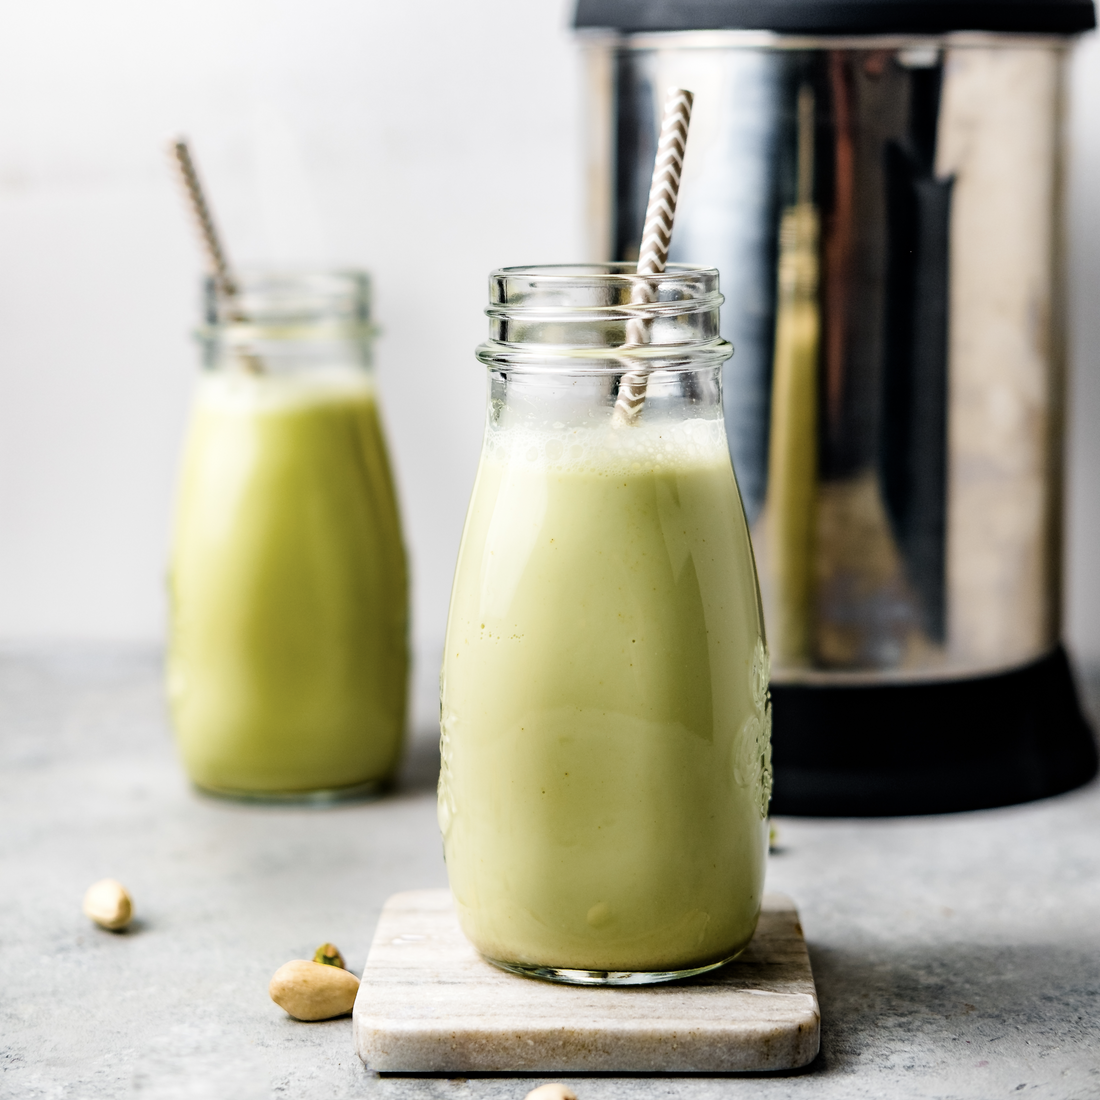 homemade pistachio milk in two glasses with straws, next to the almond cow milk maker